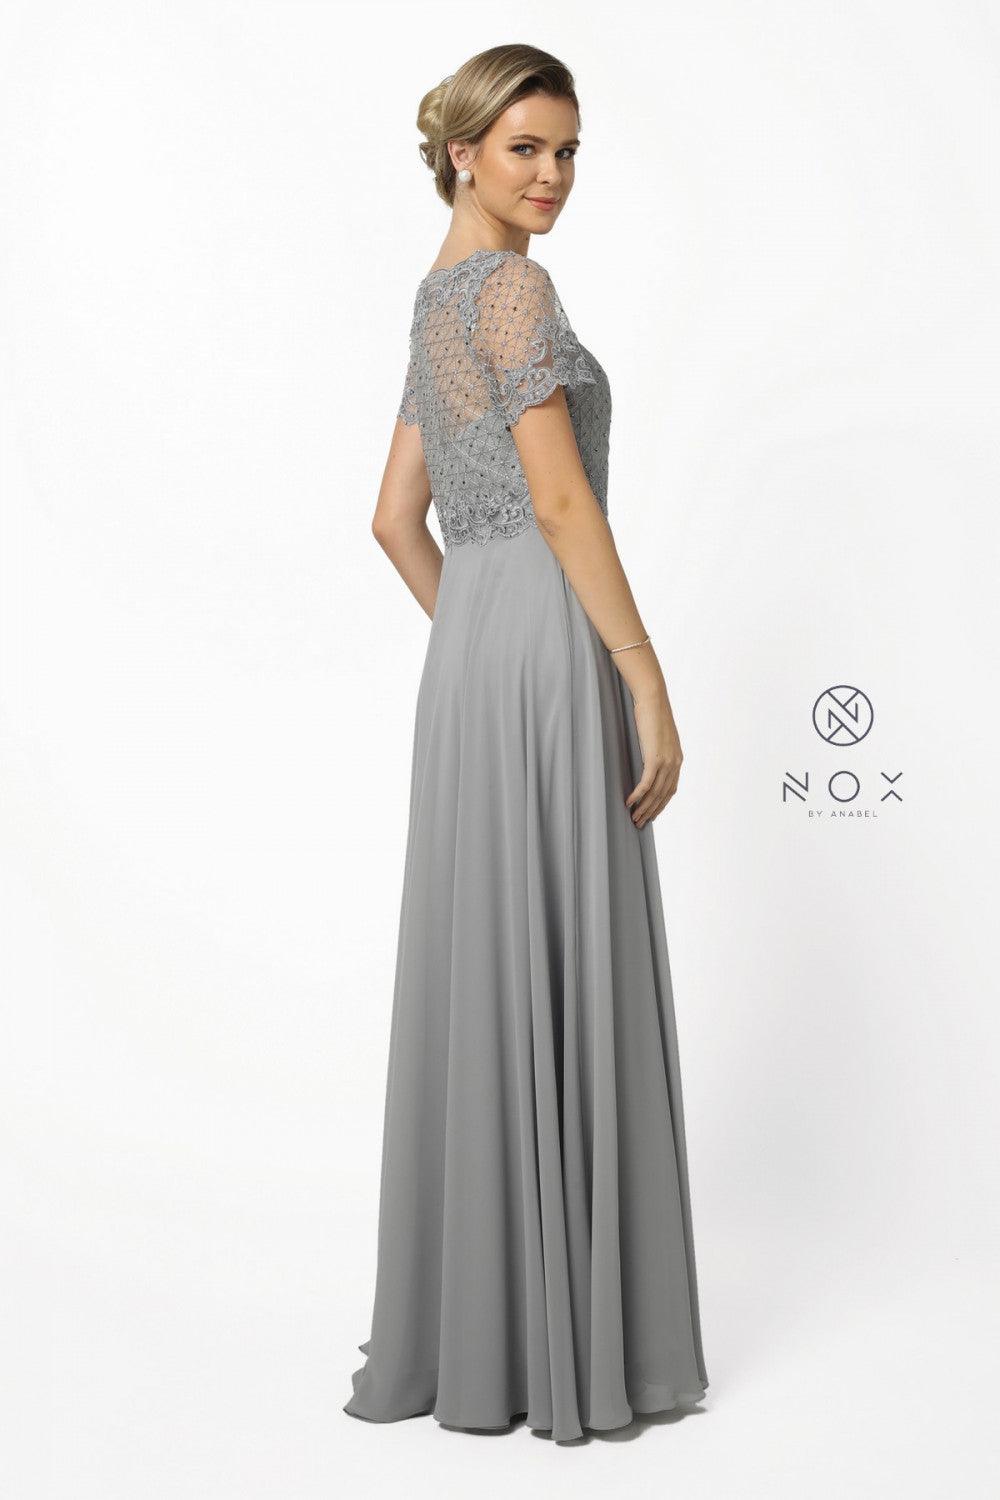 Long Formal Mother of the Bride Dress - The Dress Outlet Nox Anabel